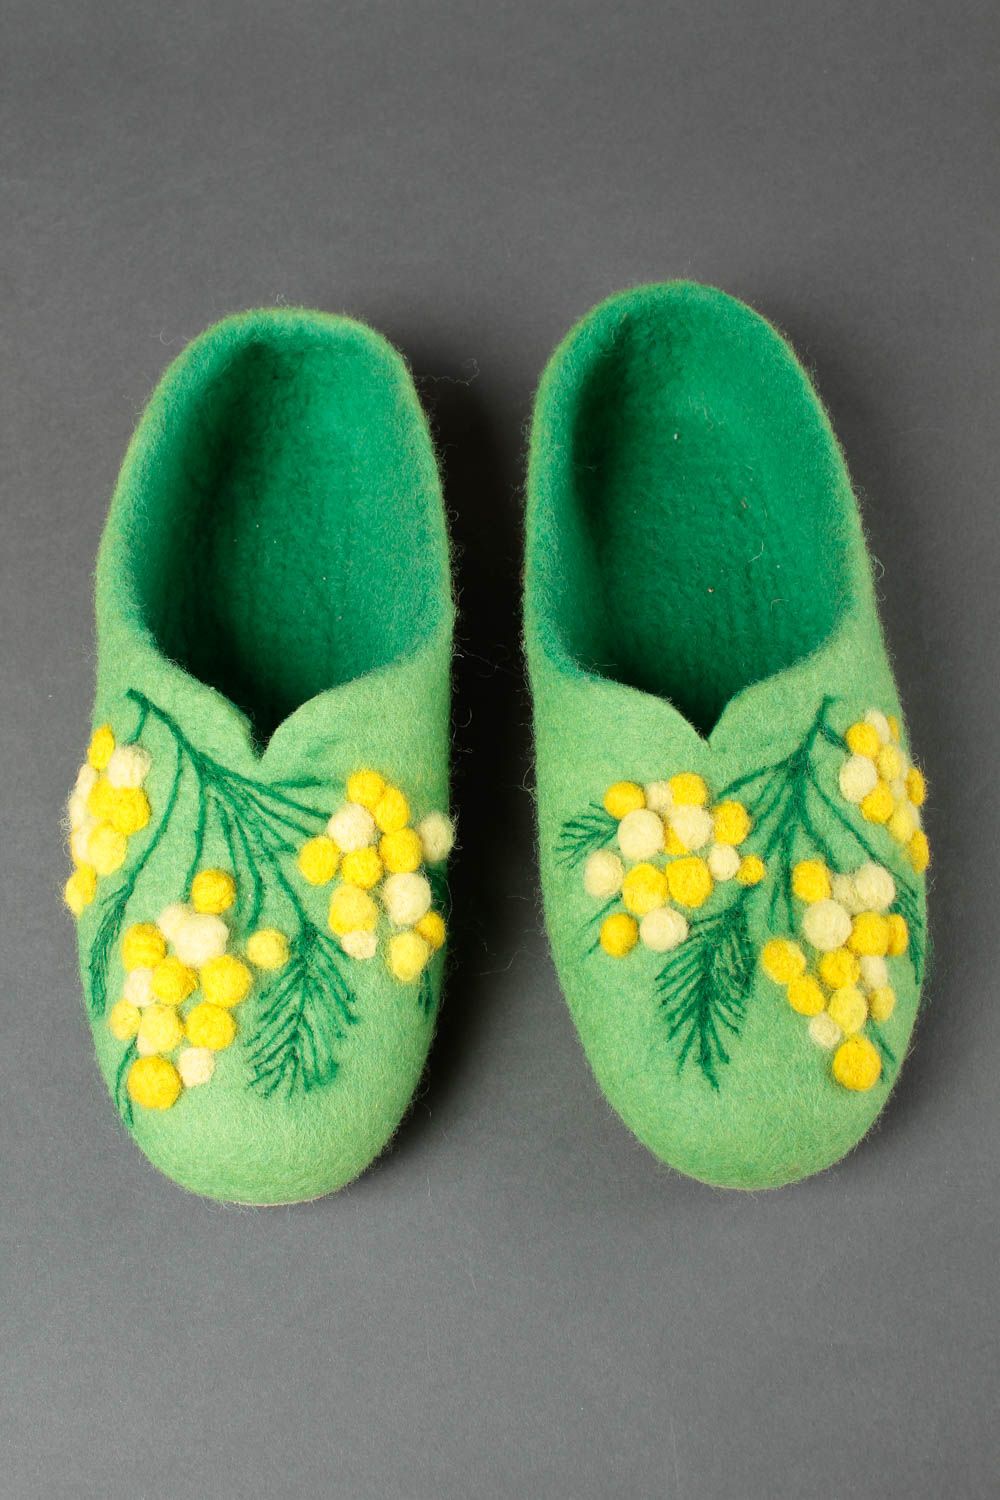 Handmade felted green slippers home woolen slippers warm stylish present  photo 4